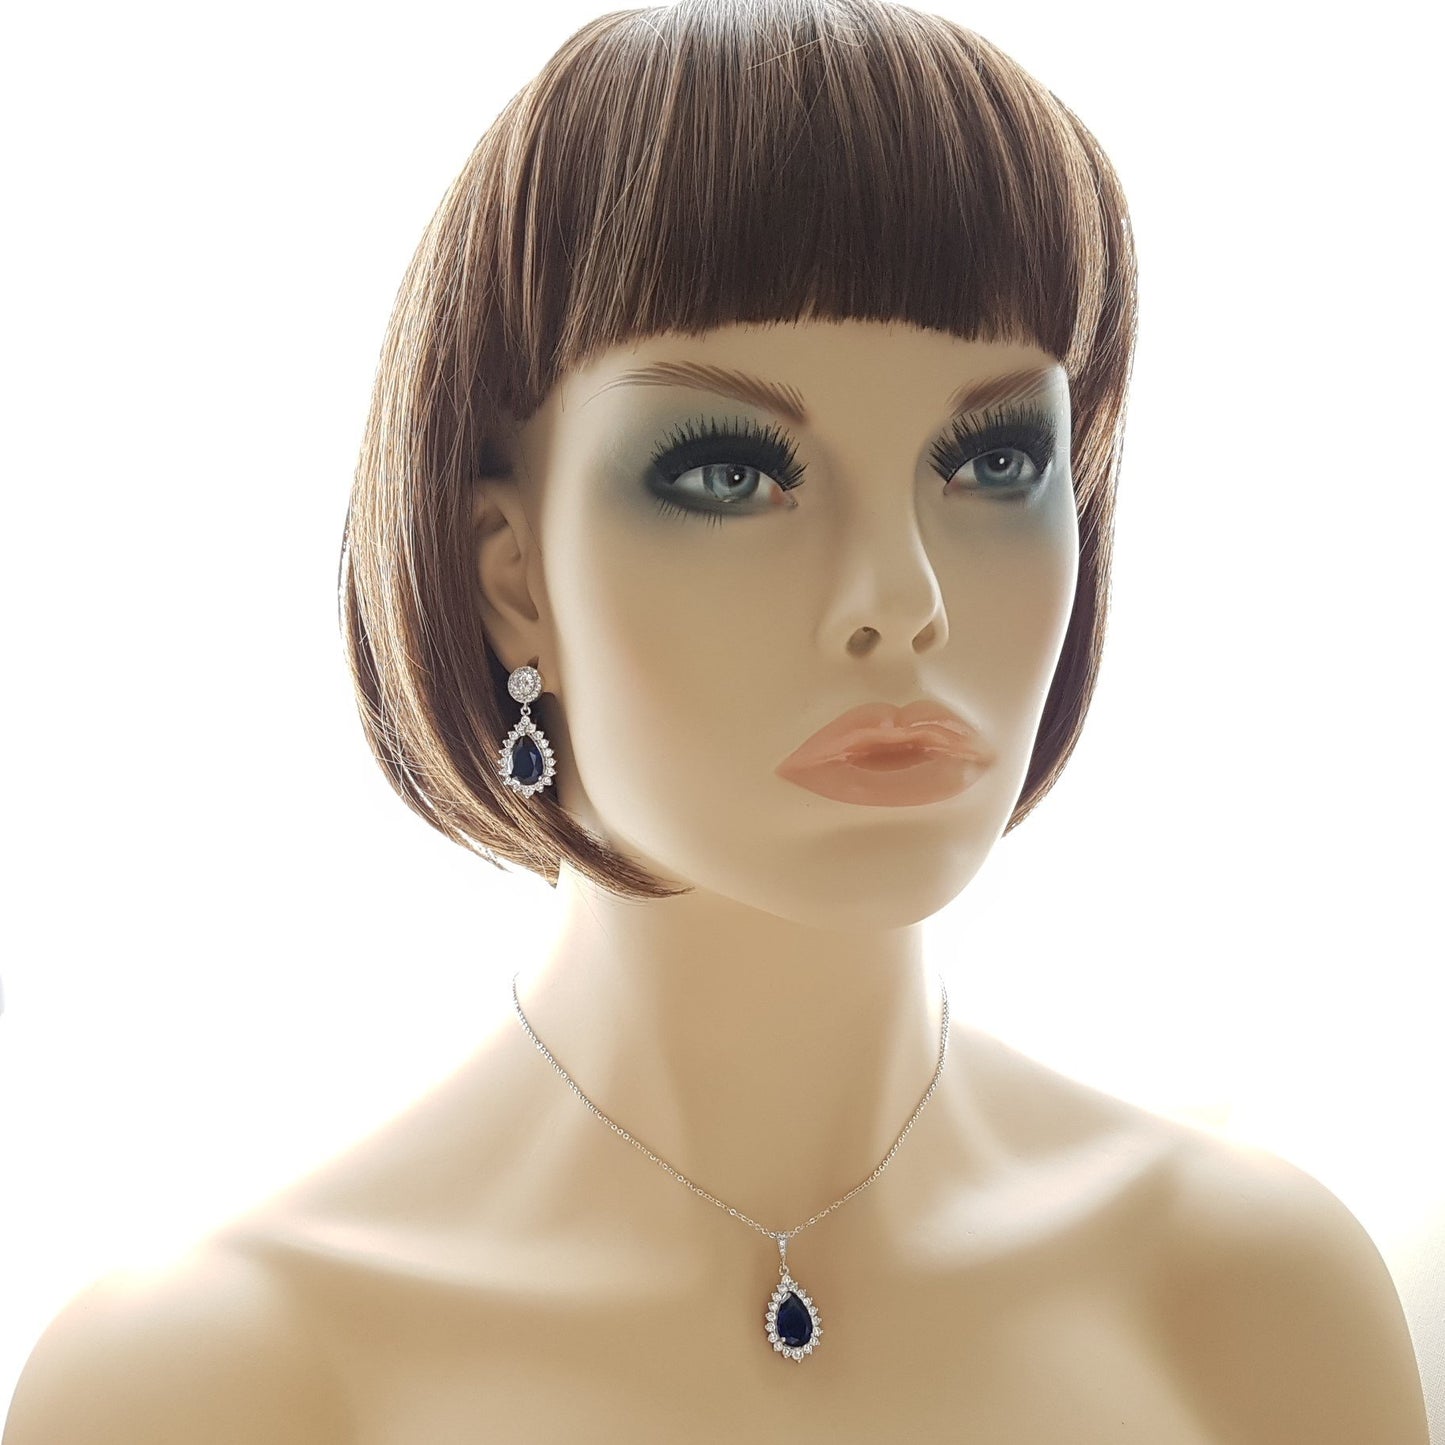 Blue Earrings Necklace Set in Gold-Aoi